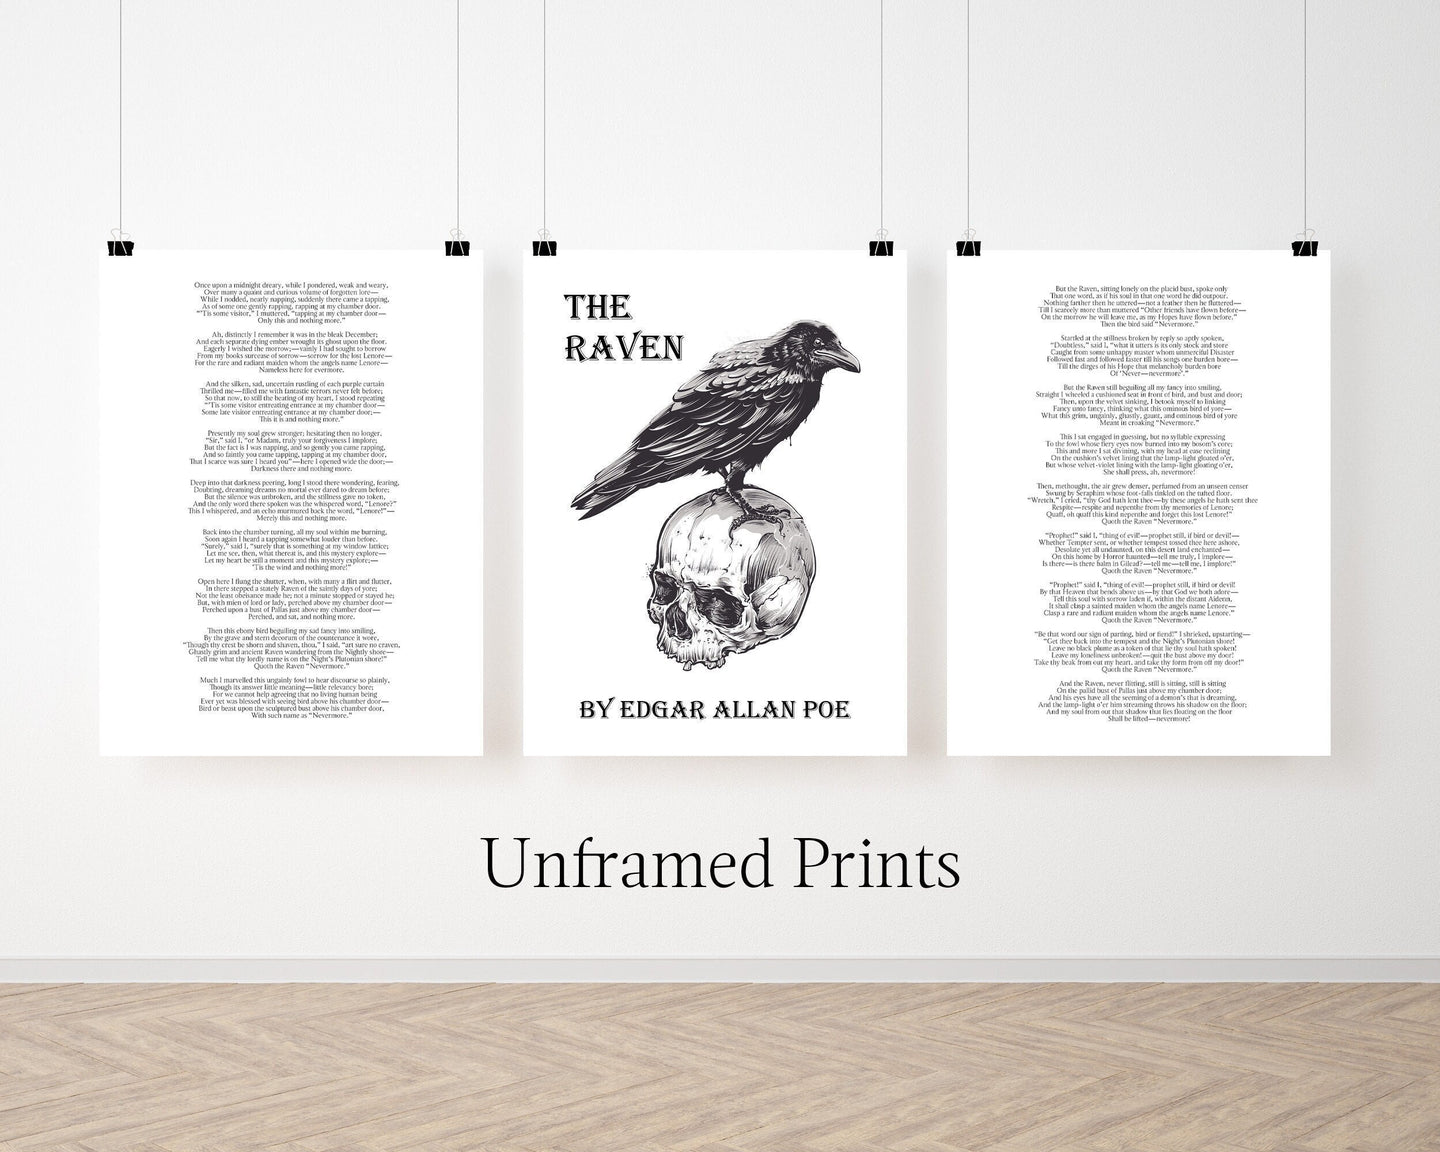 The Raven Set of 3 Edgar Allan Poe Poem Poster Prints - Quoth the Raven “Nevermore.” - Macabre Decor - Literary Wall Art